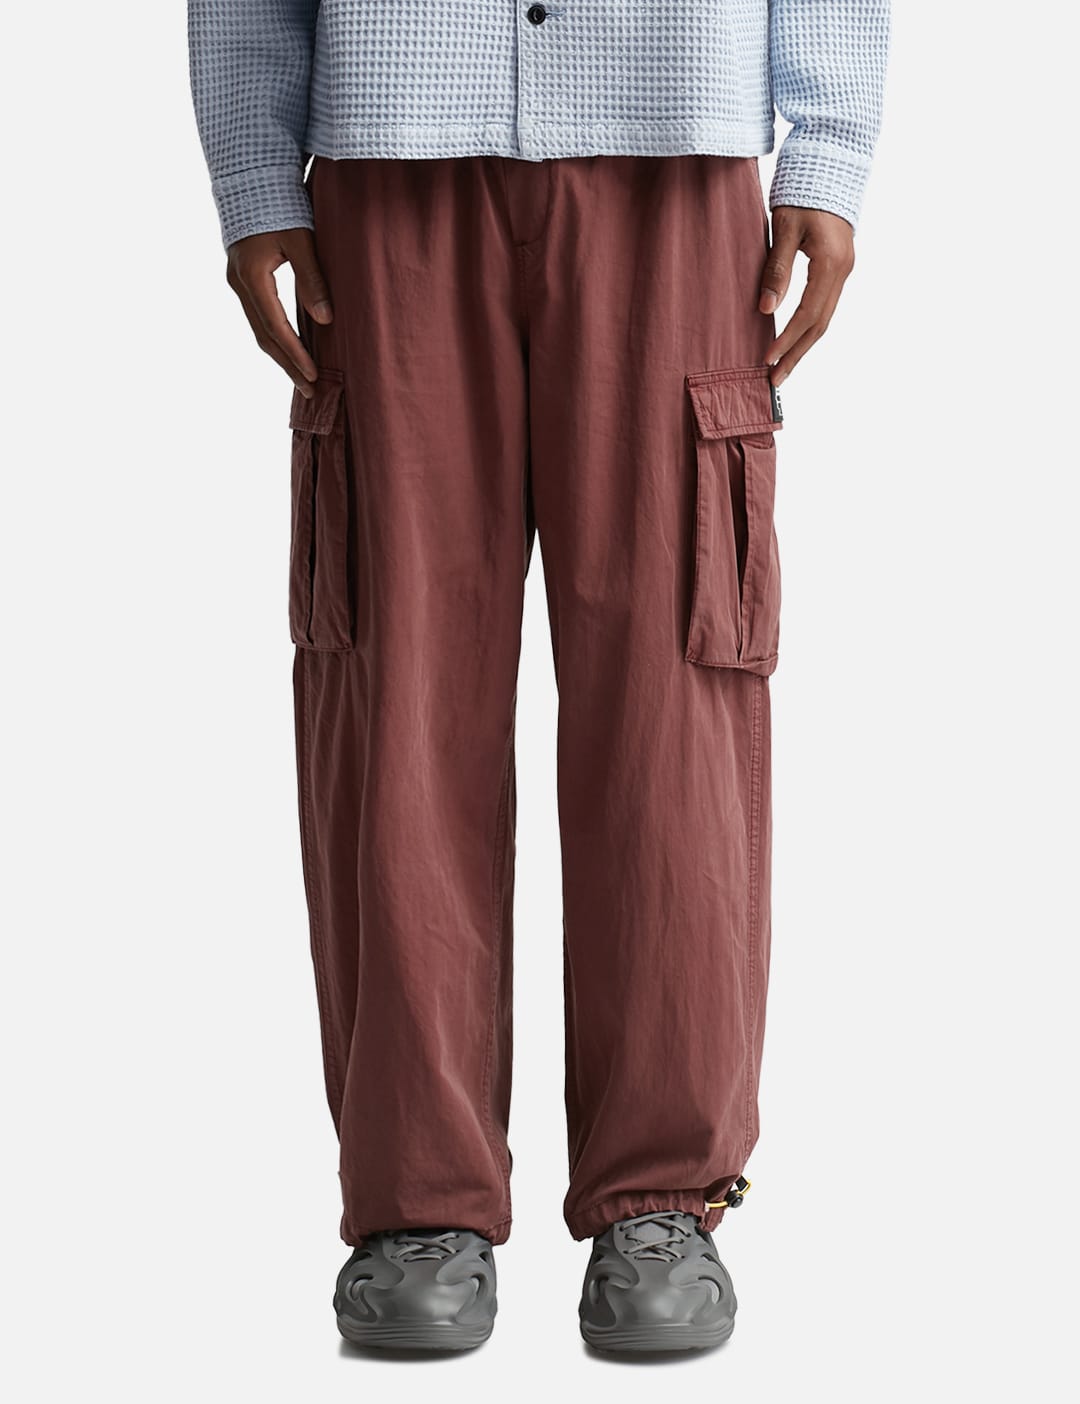 Brain Dead - FLIGHT PANTs | HBX - Globally Curated Fashion and